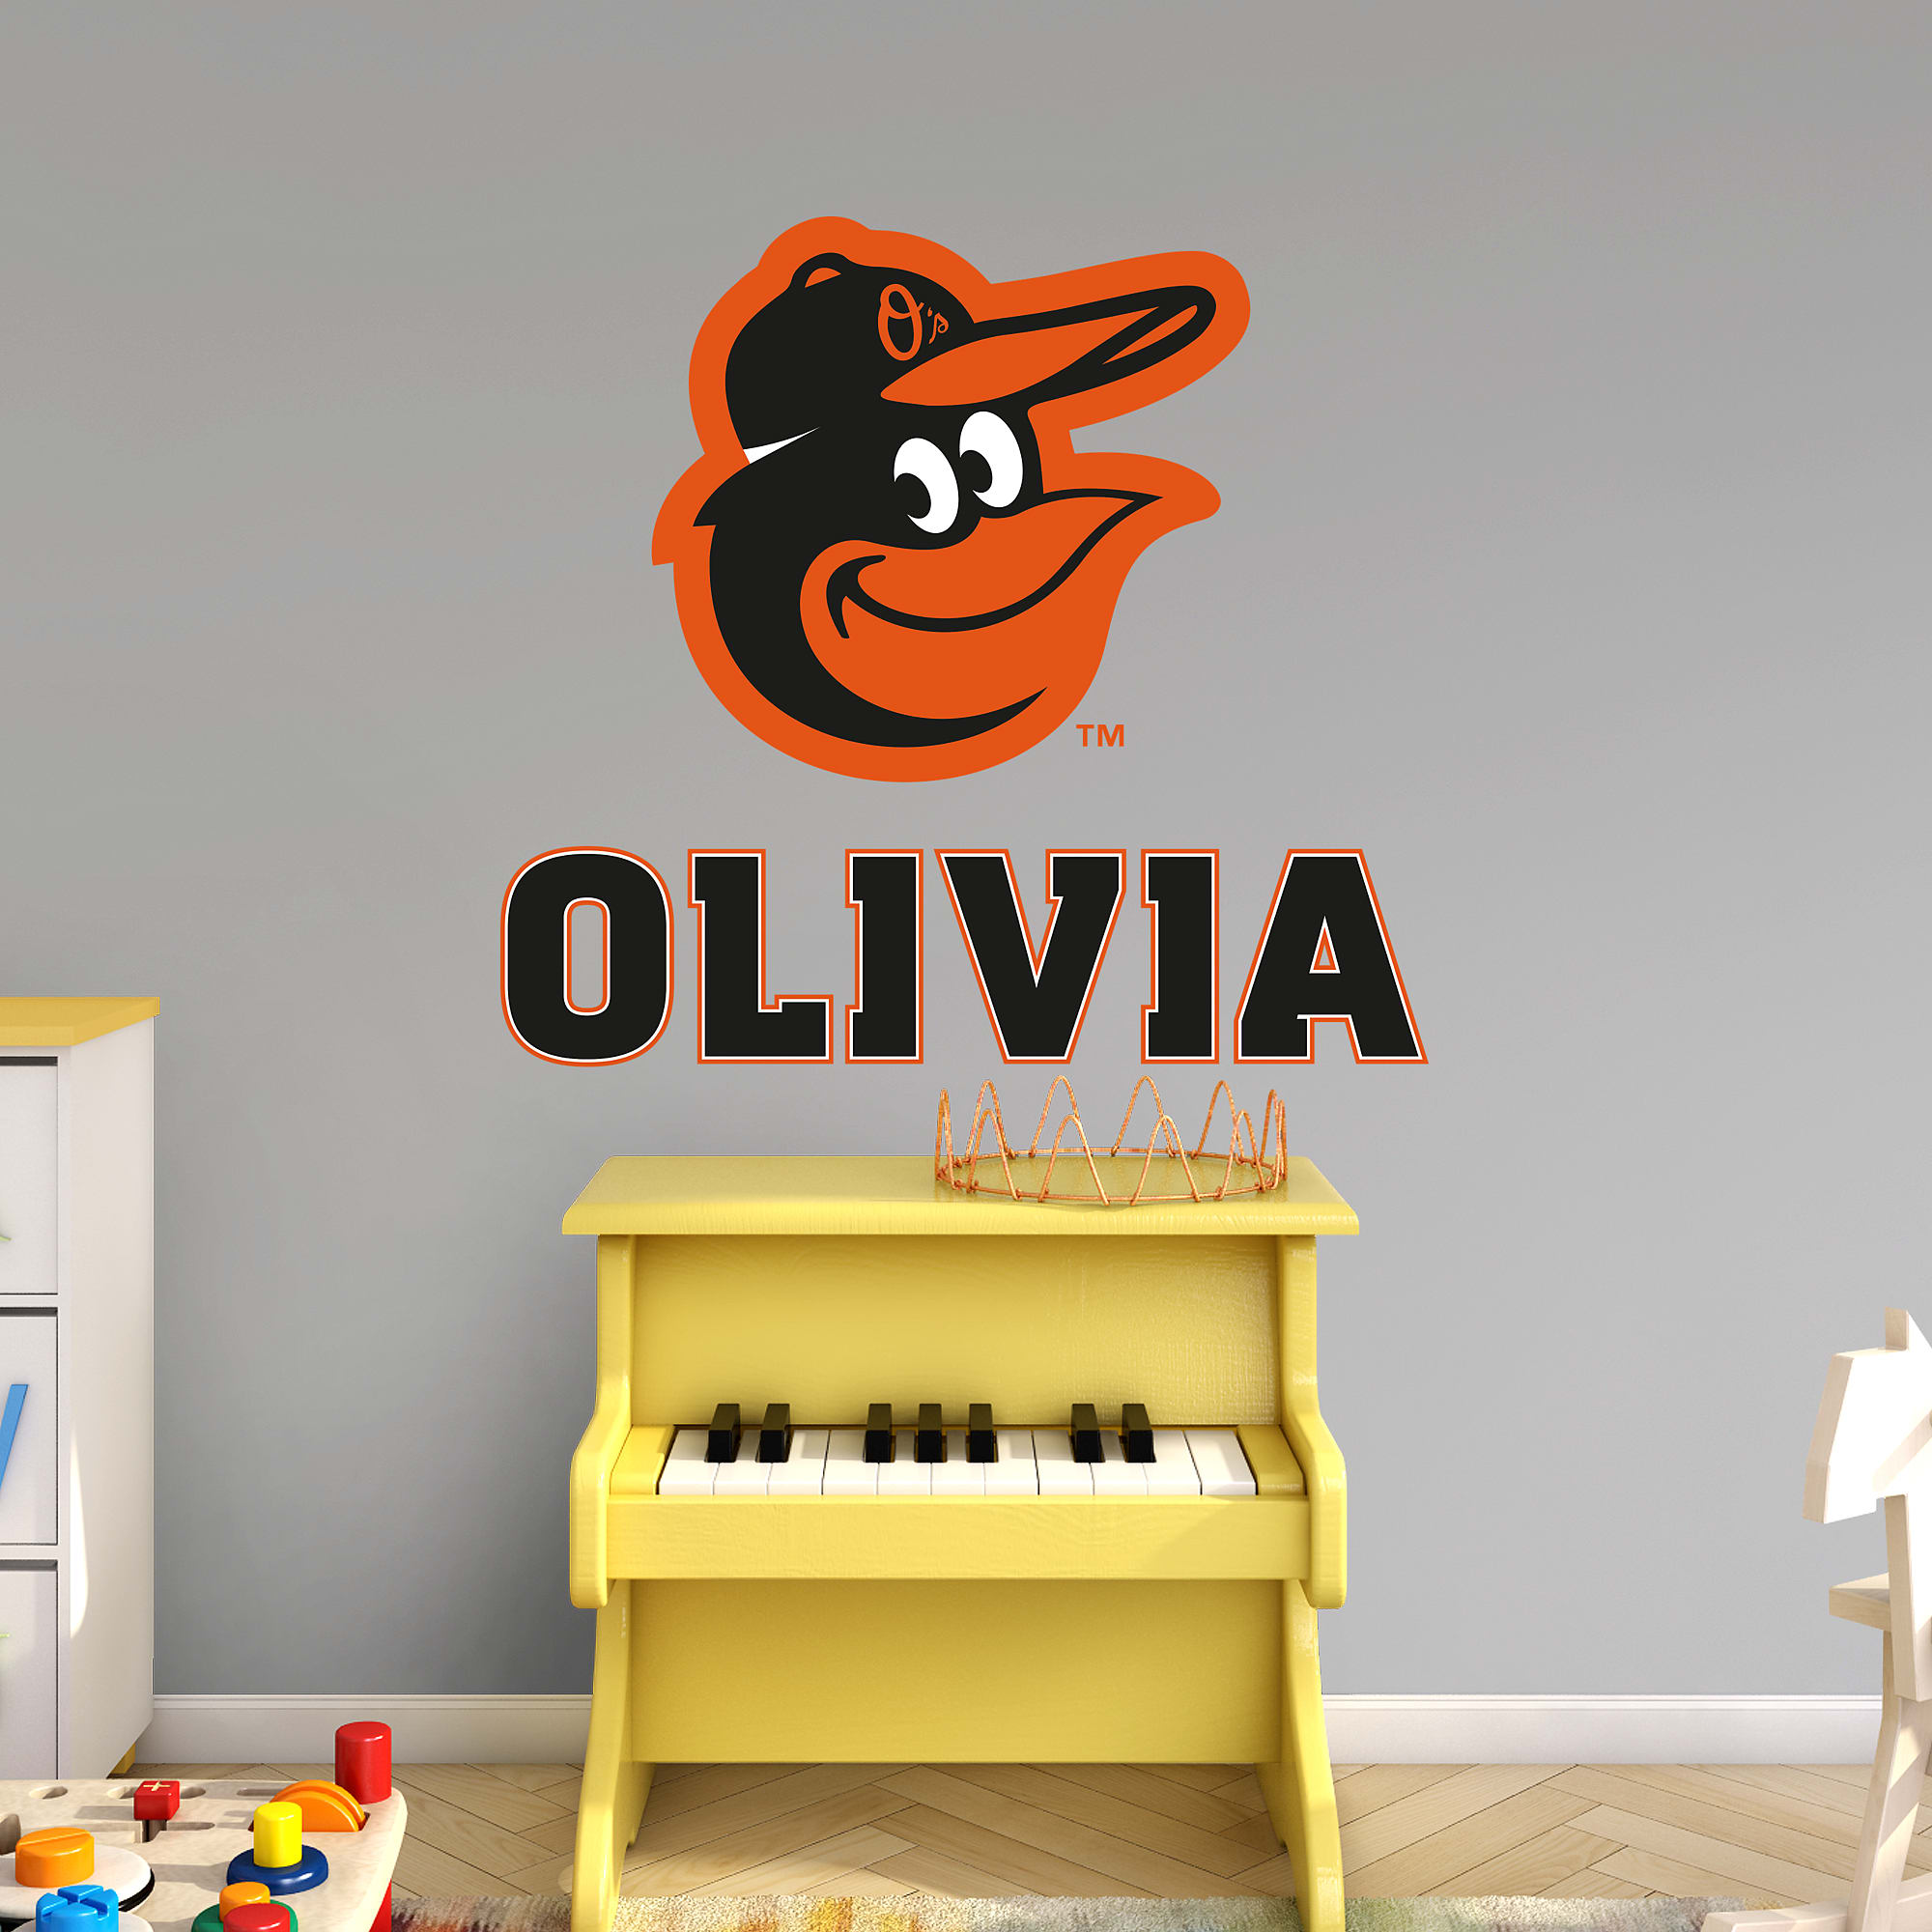 Baltimore Orioles: Alternate Stacked Personalized Name - Officially Licensed MLB Transfer Decal in Black (52"W x 39.5"H) by Fath